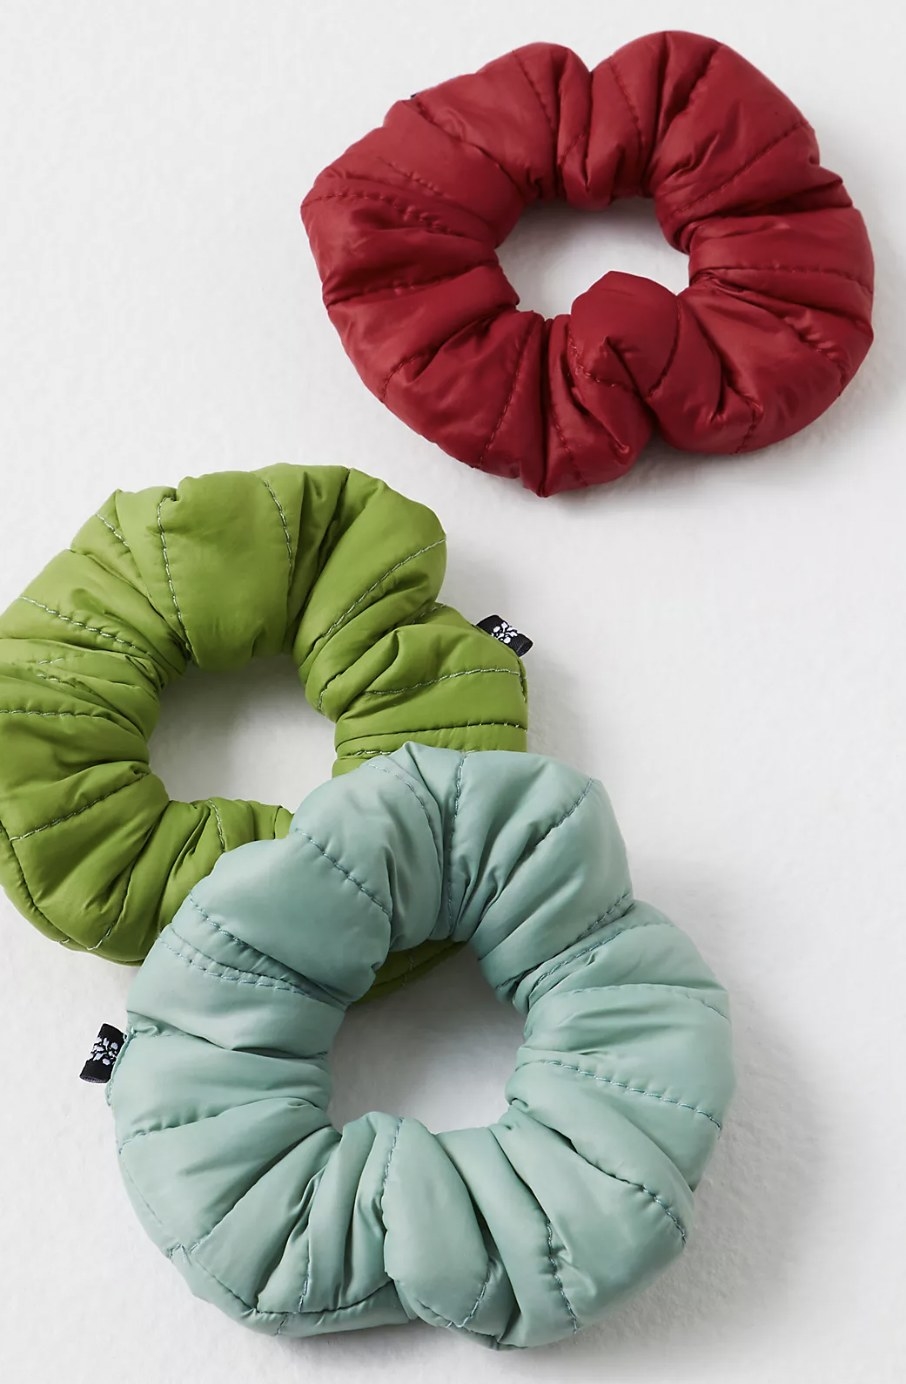 the scrunchie in blue green and red